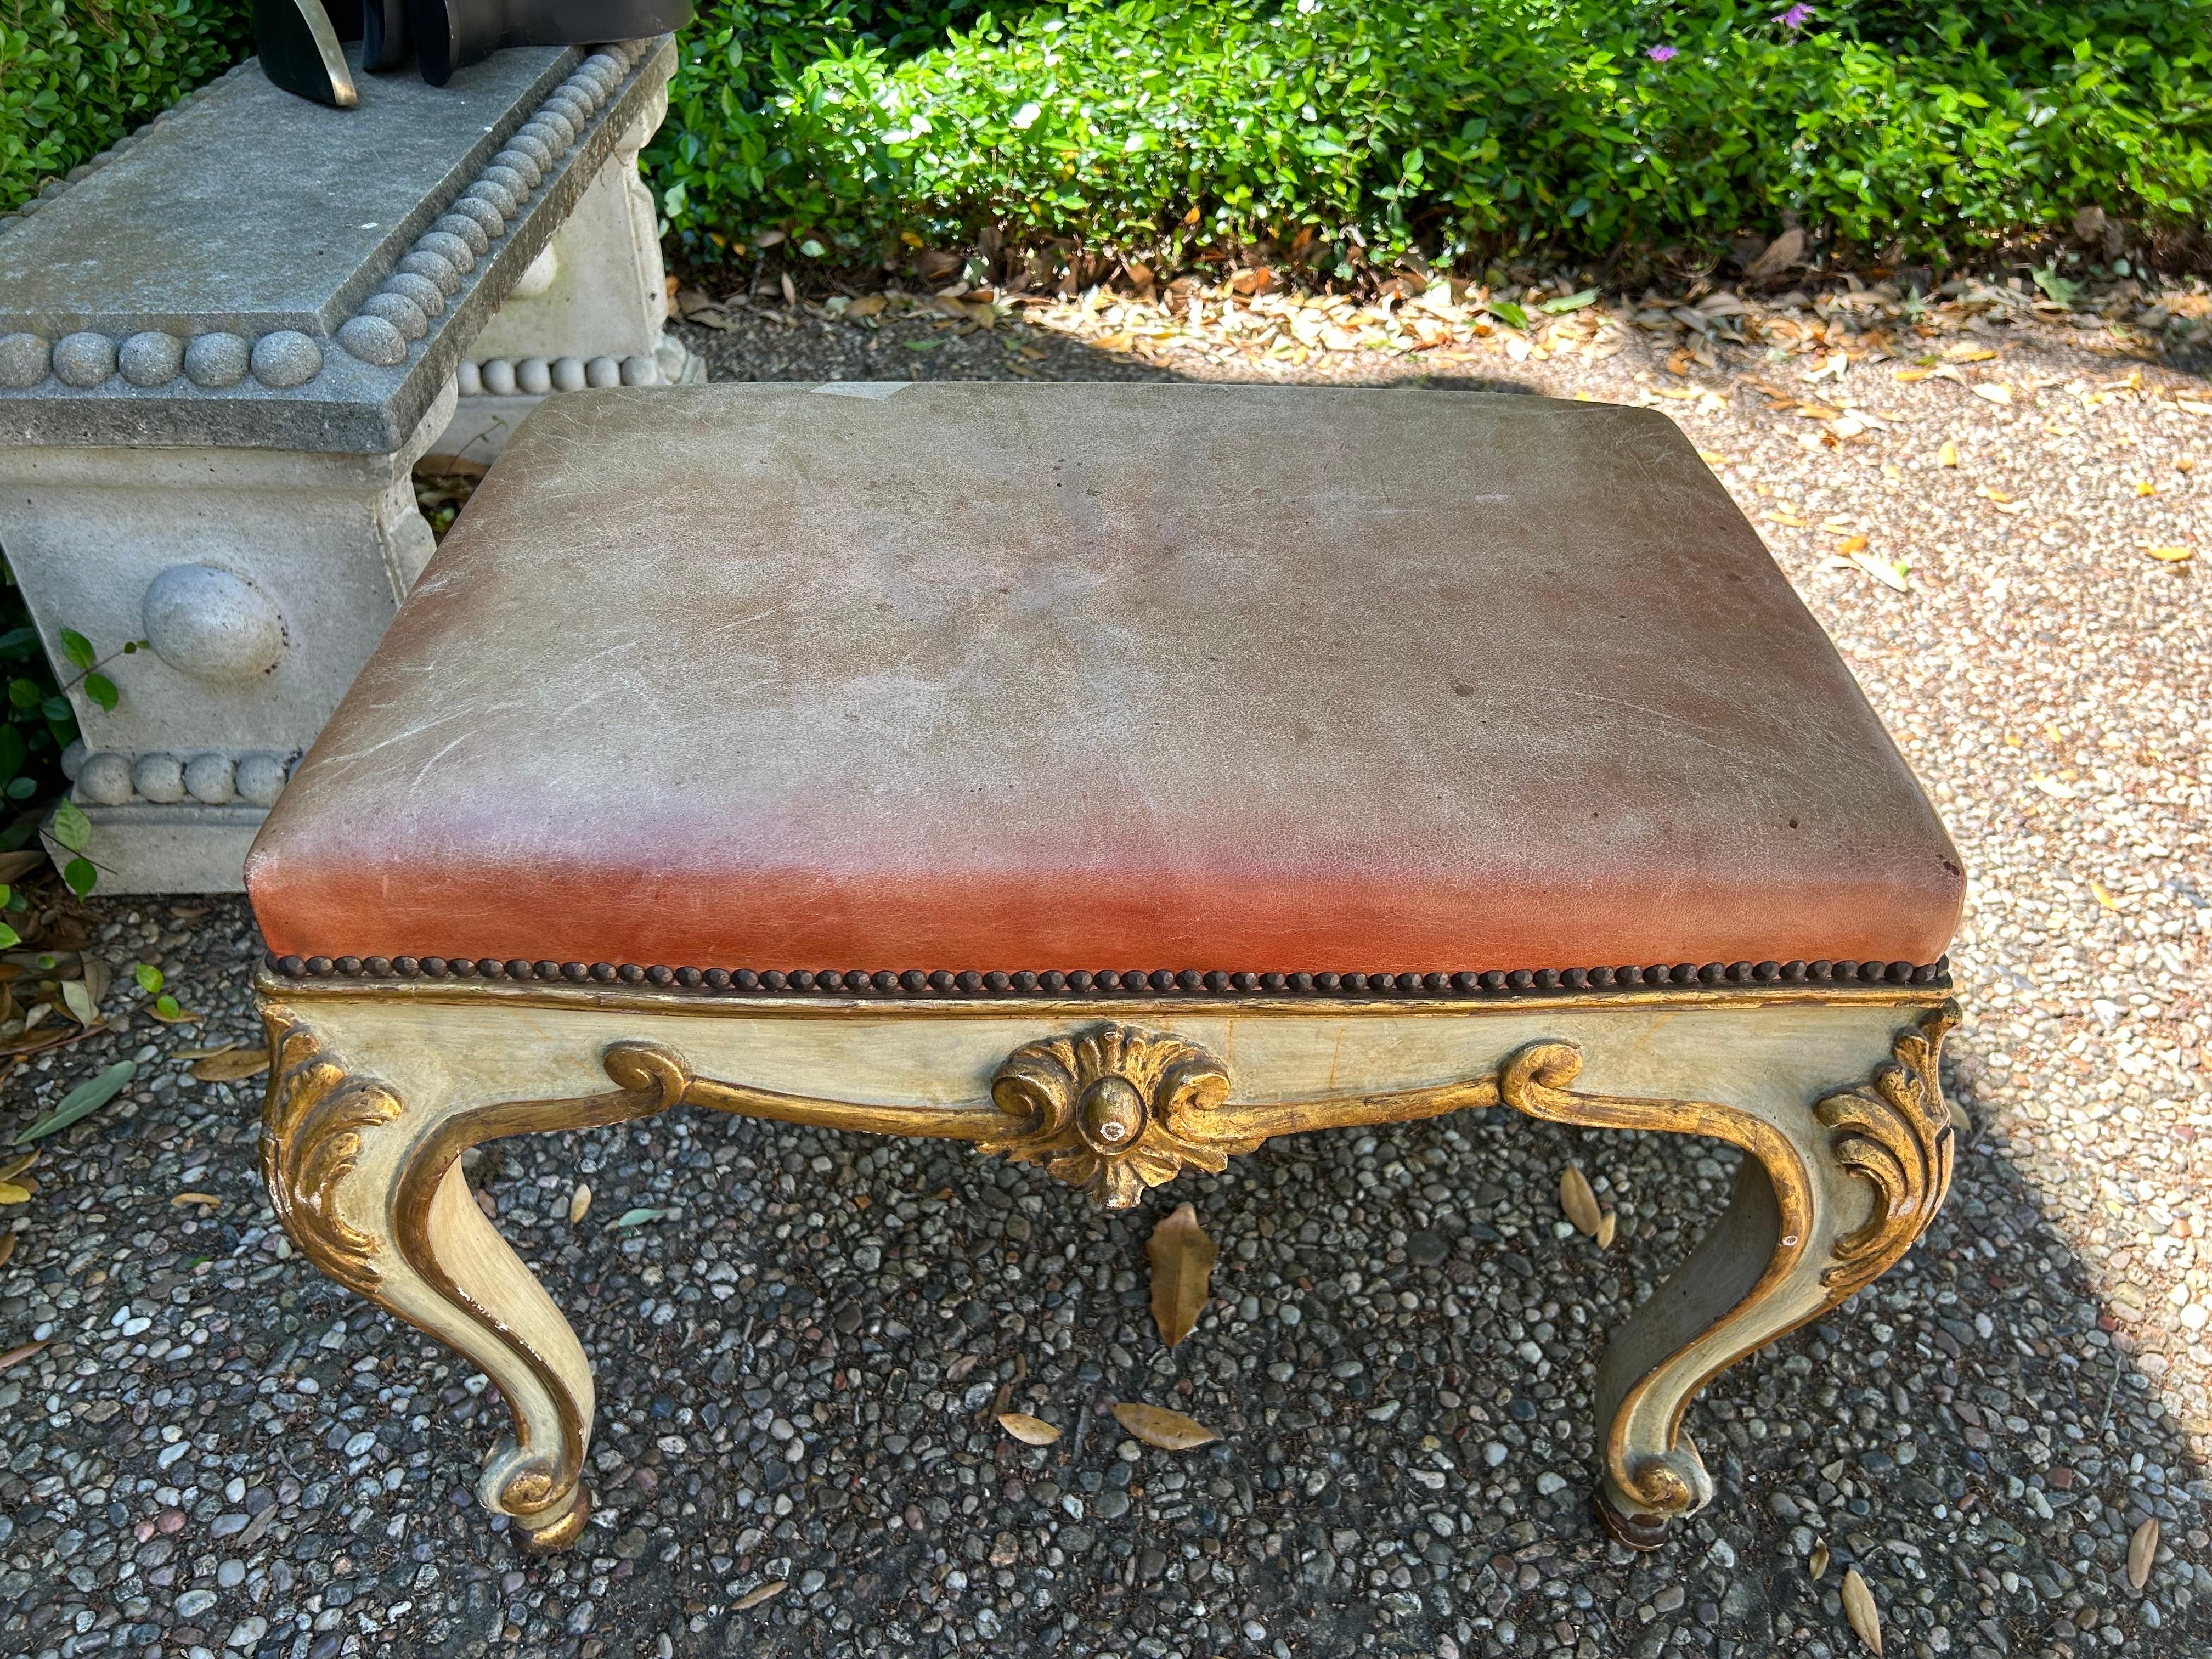 Pair Of 19th Century Italian Painted And Parcel Gilt Ottomans.
This pair of antique Italian Regence style painted and gilt ottomans or benches are currently upholstered in distressed leather with nail head detail, but easily reupholstered in the